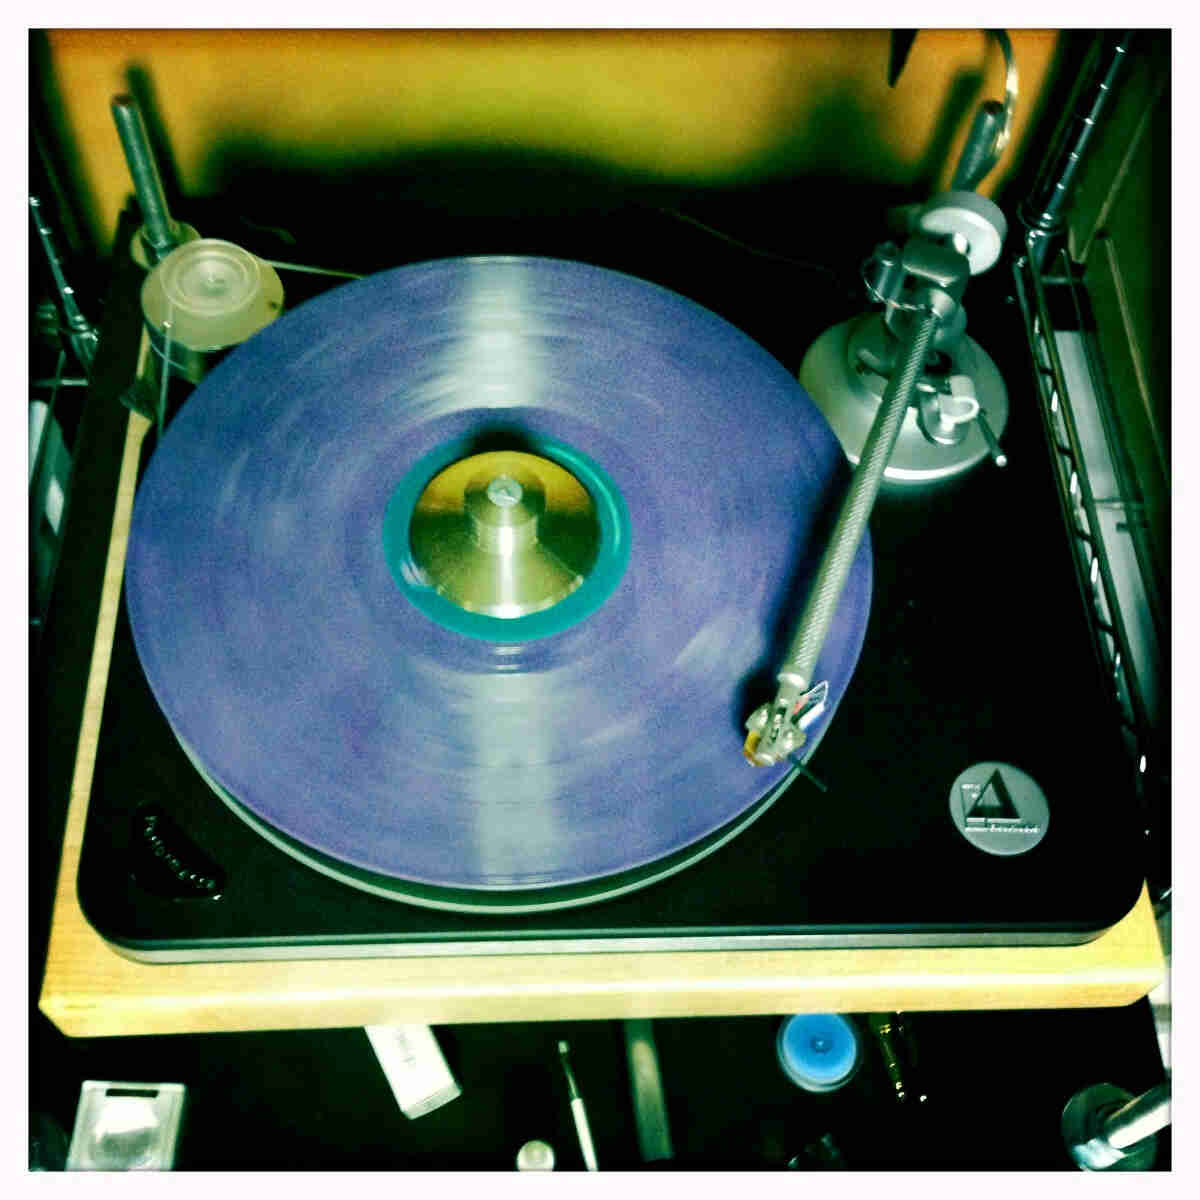 Downward view of a blue record album on a turntable